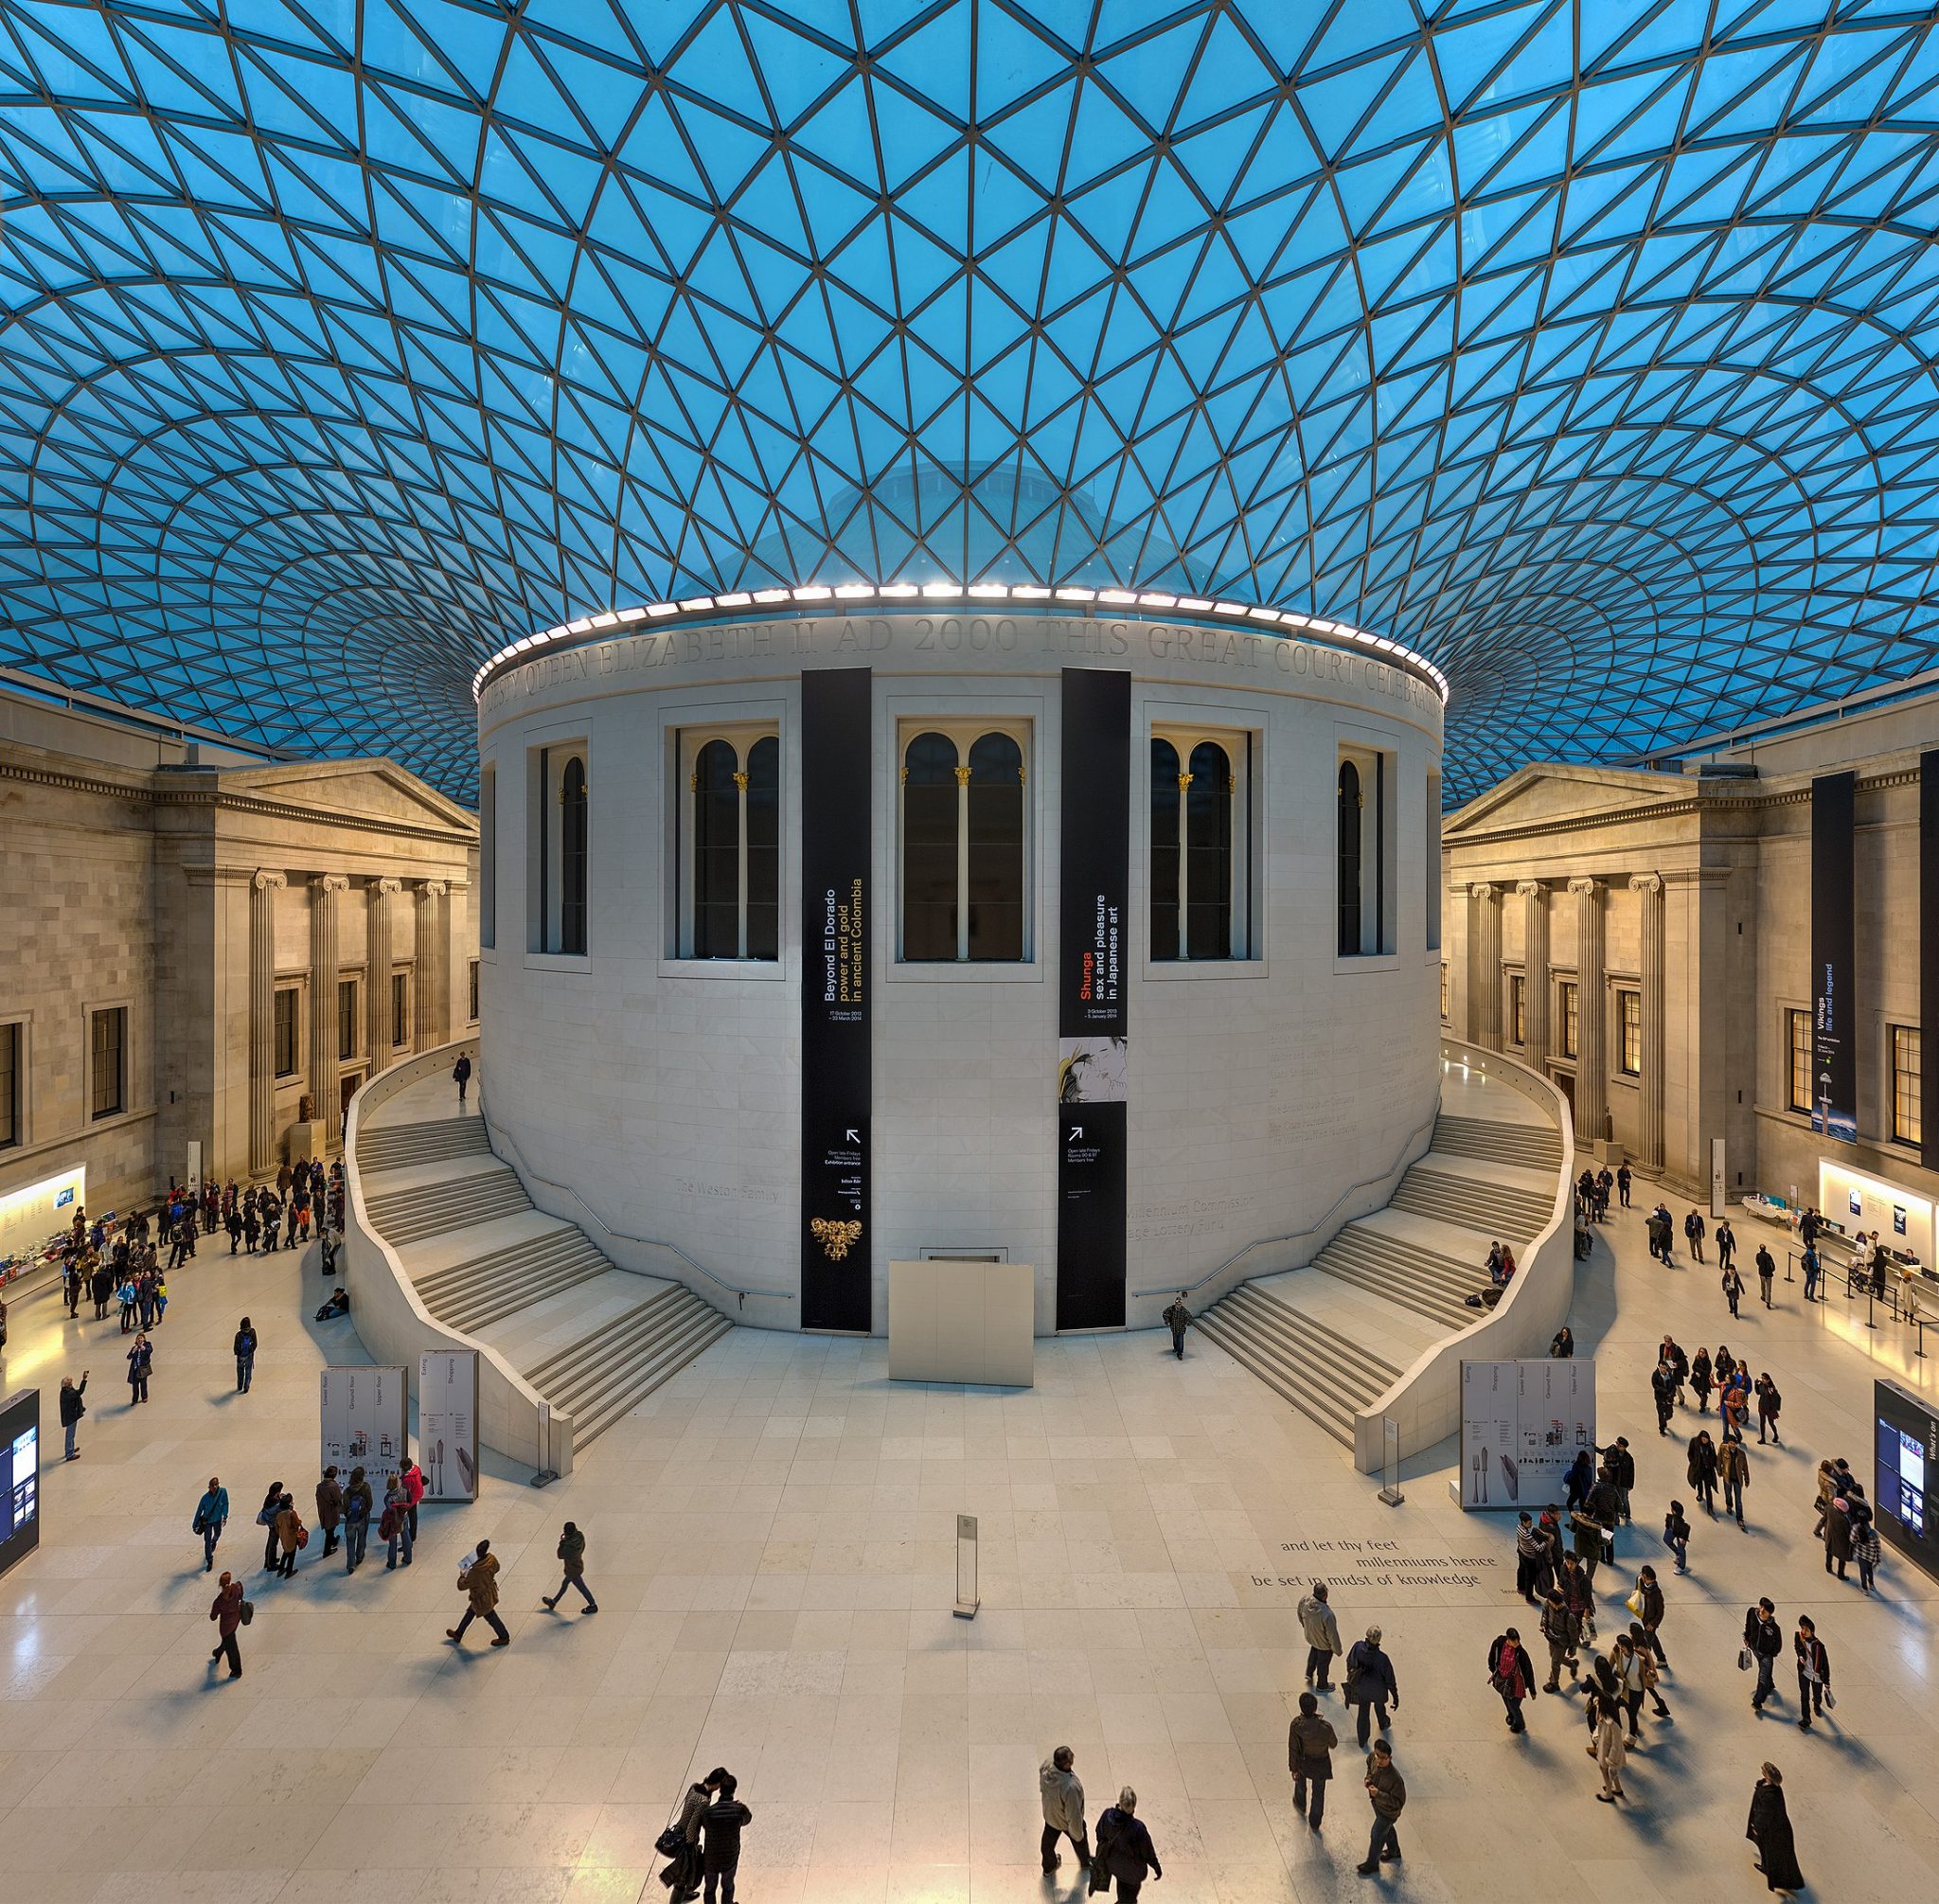 The British Museum, London. Image Wikimedia Commons. Photo by Diliff